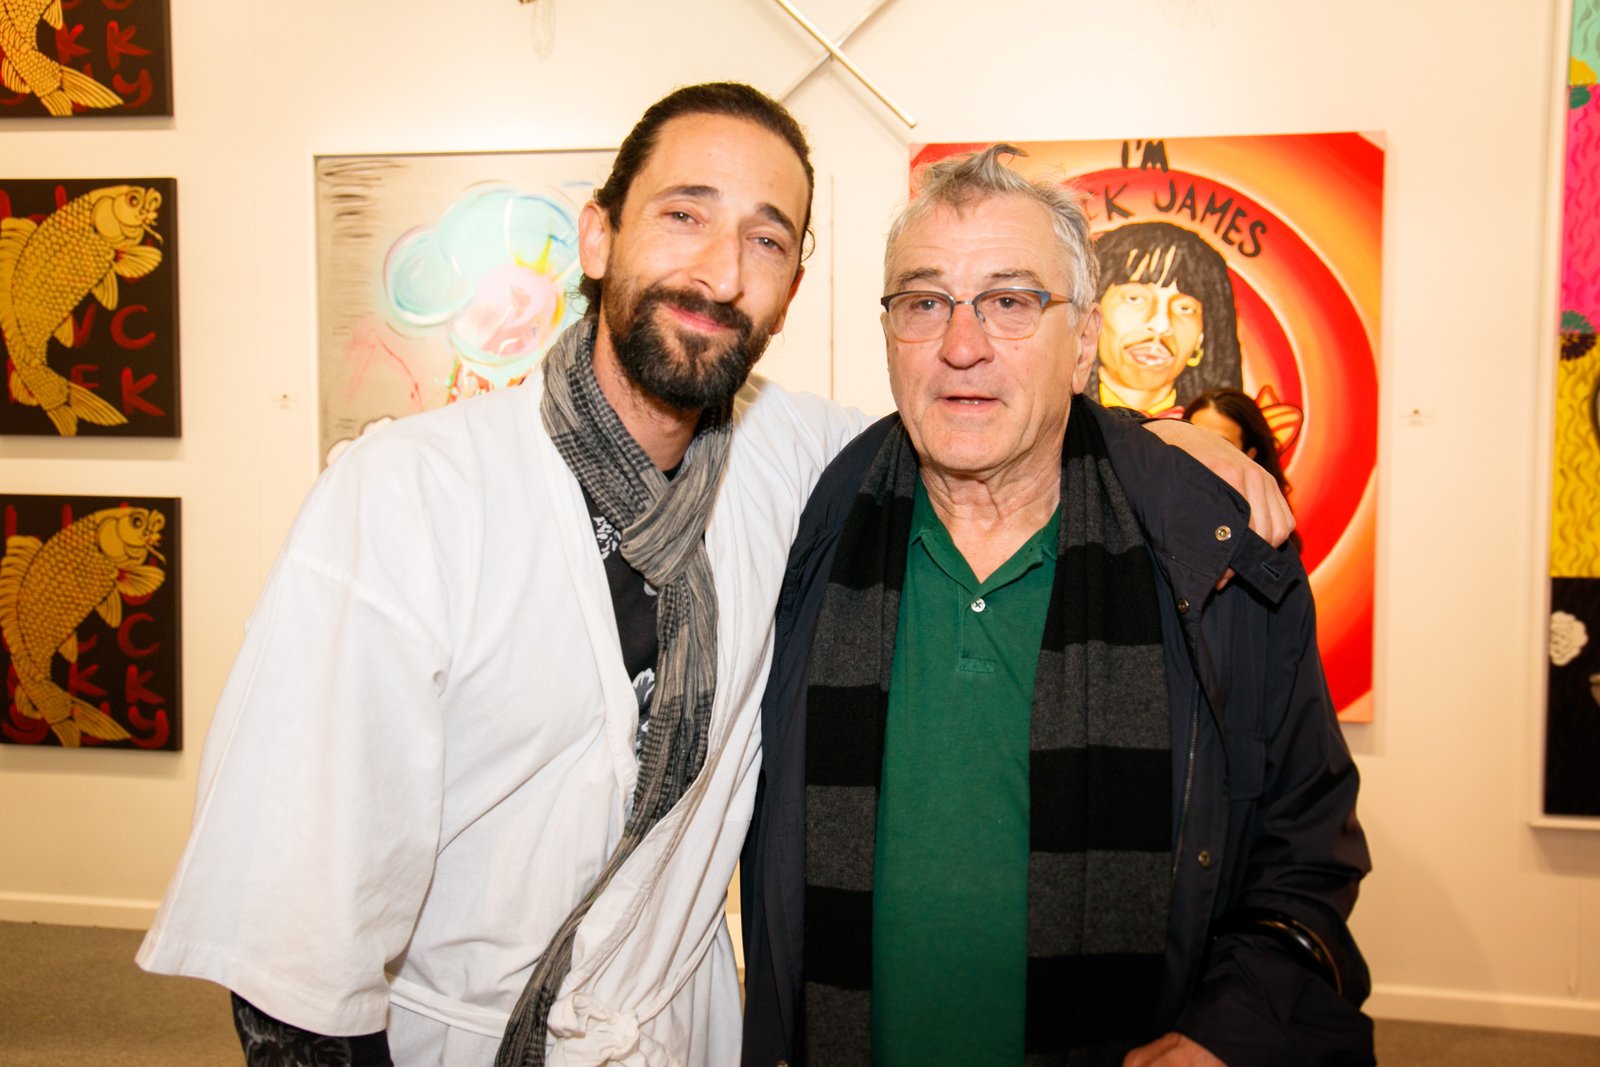 Adrien Brody’s exhibit “Hooked” Star-Studded Opening